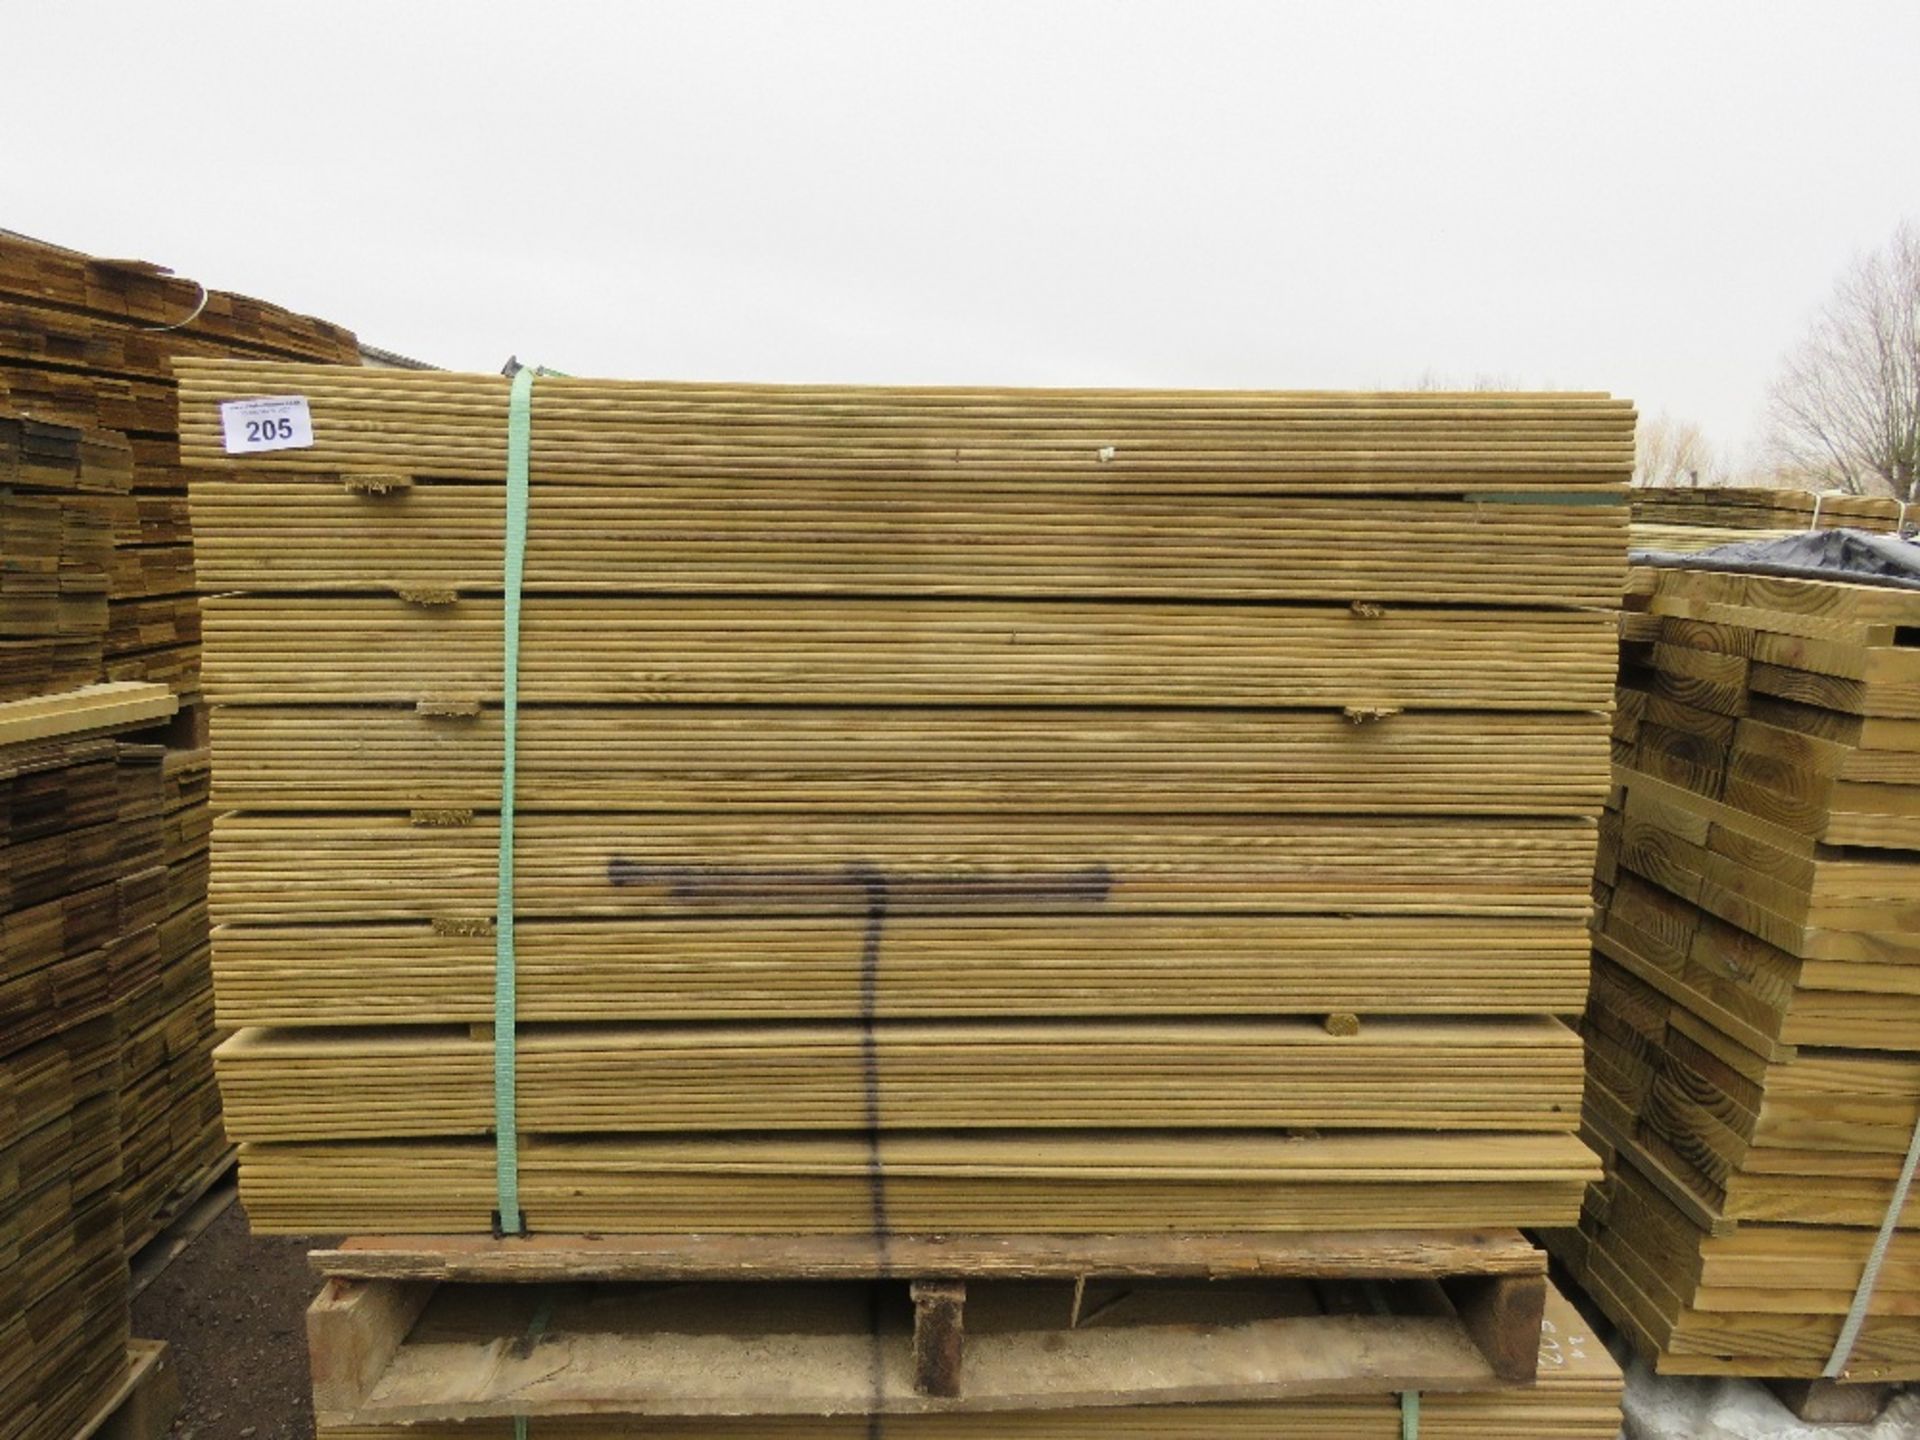 2 X PALLETS OF TREATED HIT AND MISS FENCE CLADDING BOARDS 1.04M LENGTH X 100MM WIDTH APPROX. - Image 2 of 6